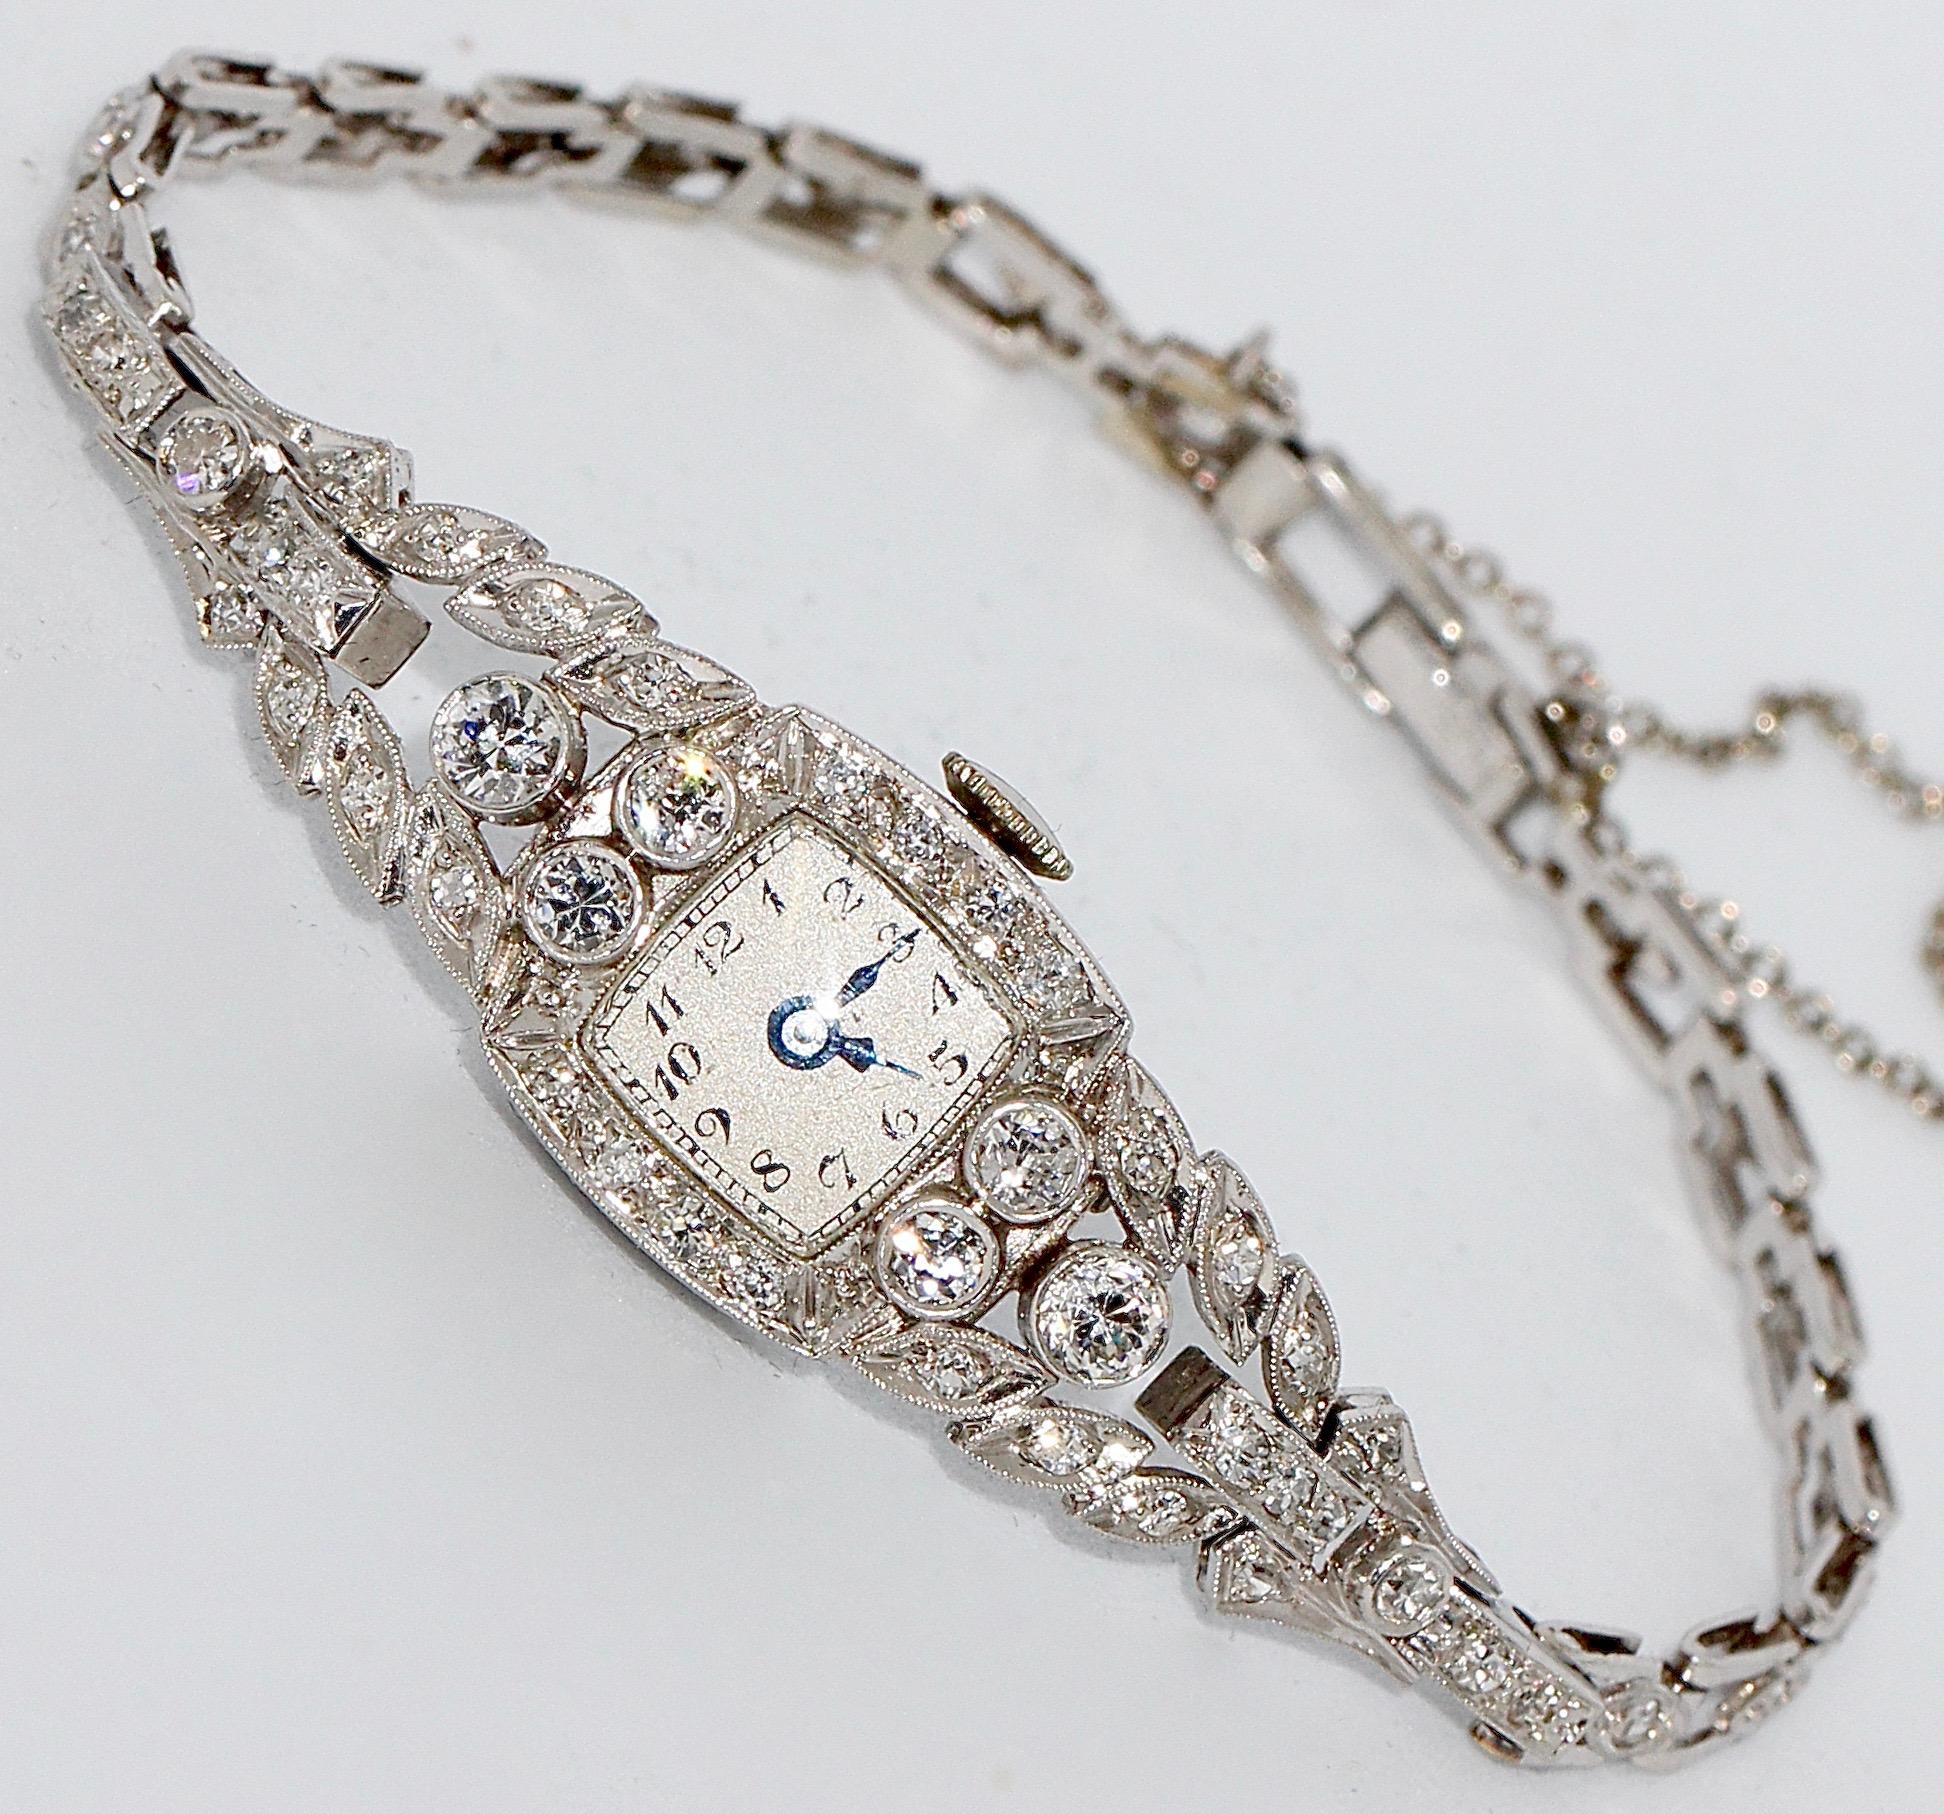 Antique Art Nouveau ladies watch, platinum with diamonds.

Case and strap are studded with diamonds throughout.

Manual wind movement.
Very good condition.